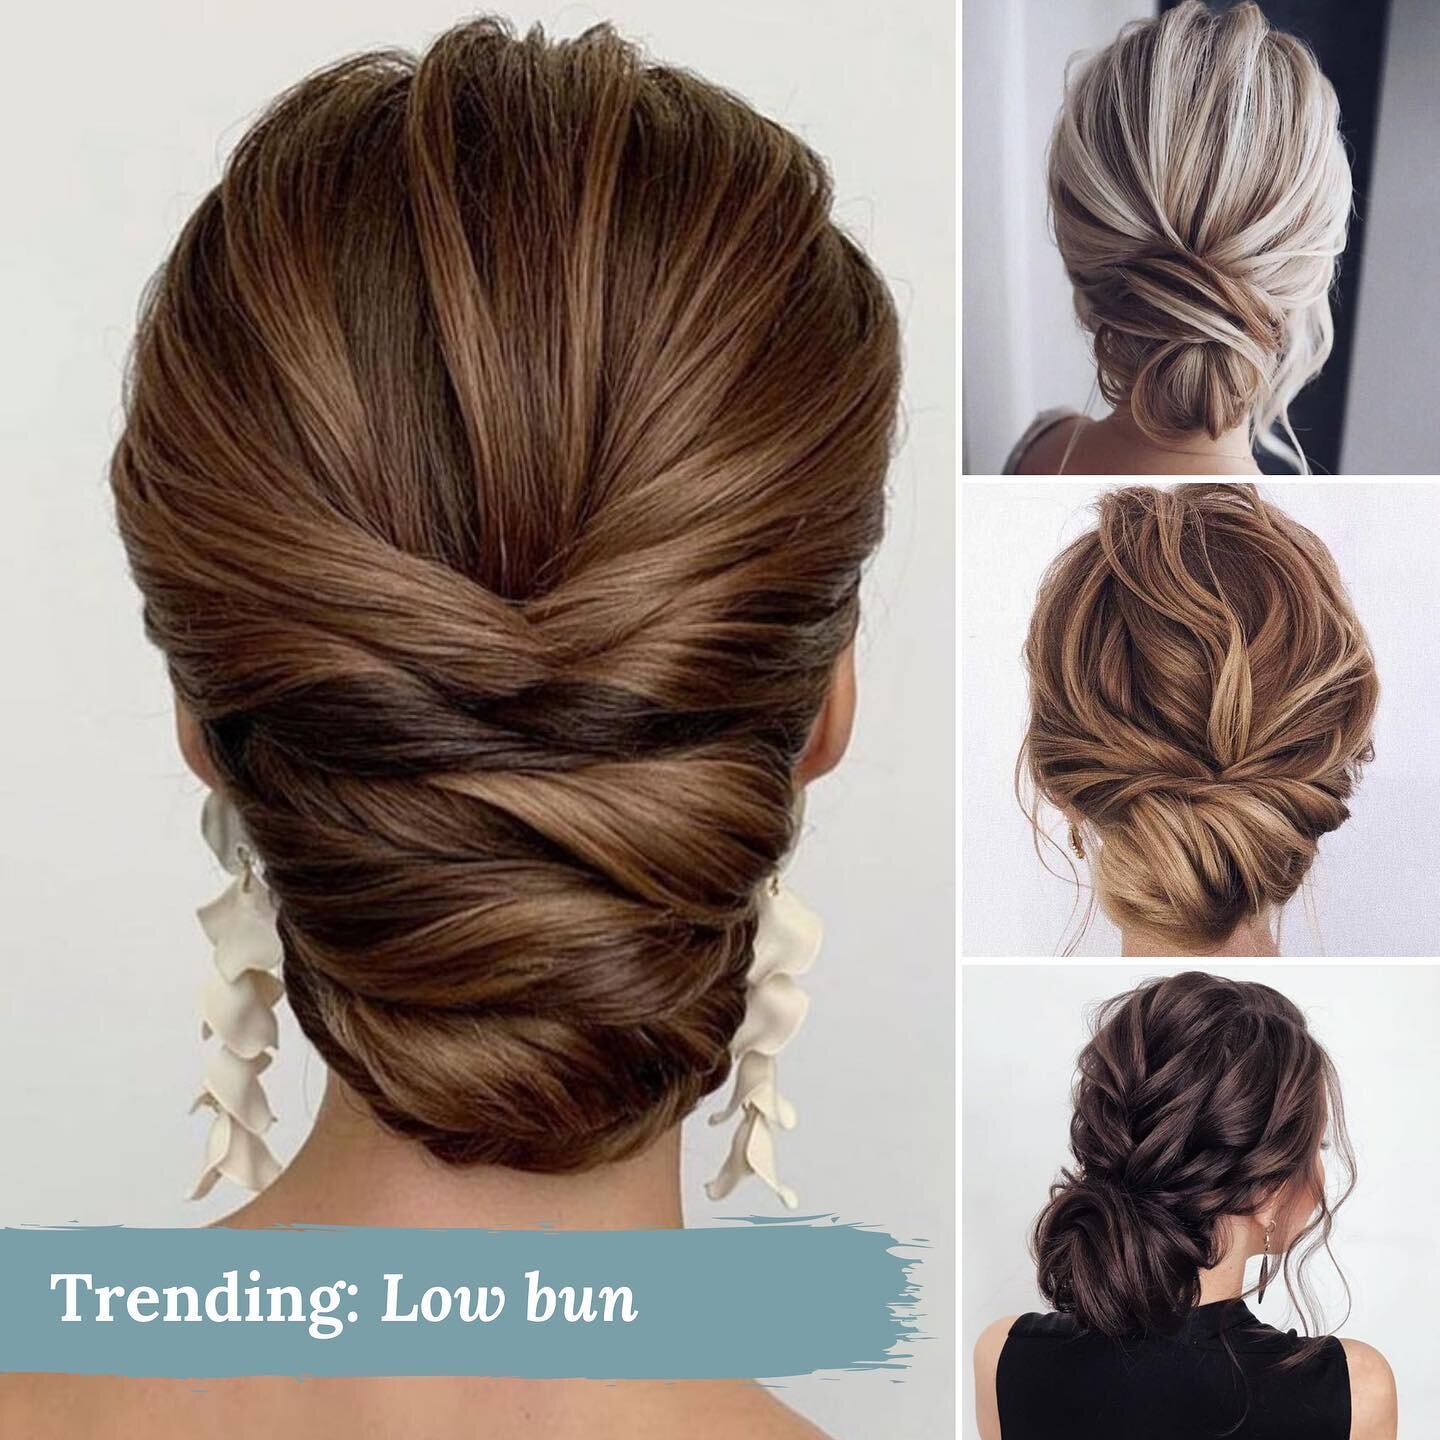 There are very few looks that suit almost every age and every style.

Looking for an elegant and classic look that brings out your best features? 
The low bun is definitely the one for you!

#SamanthaJamesSalon